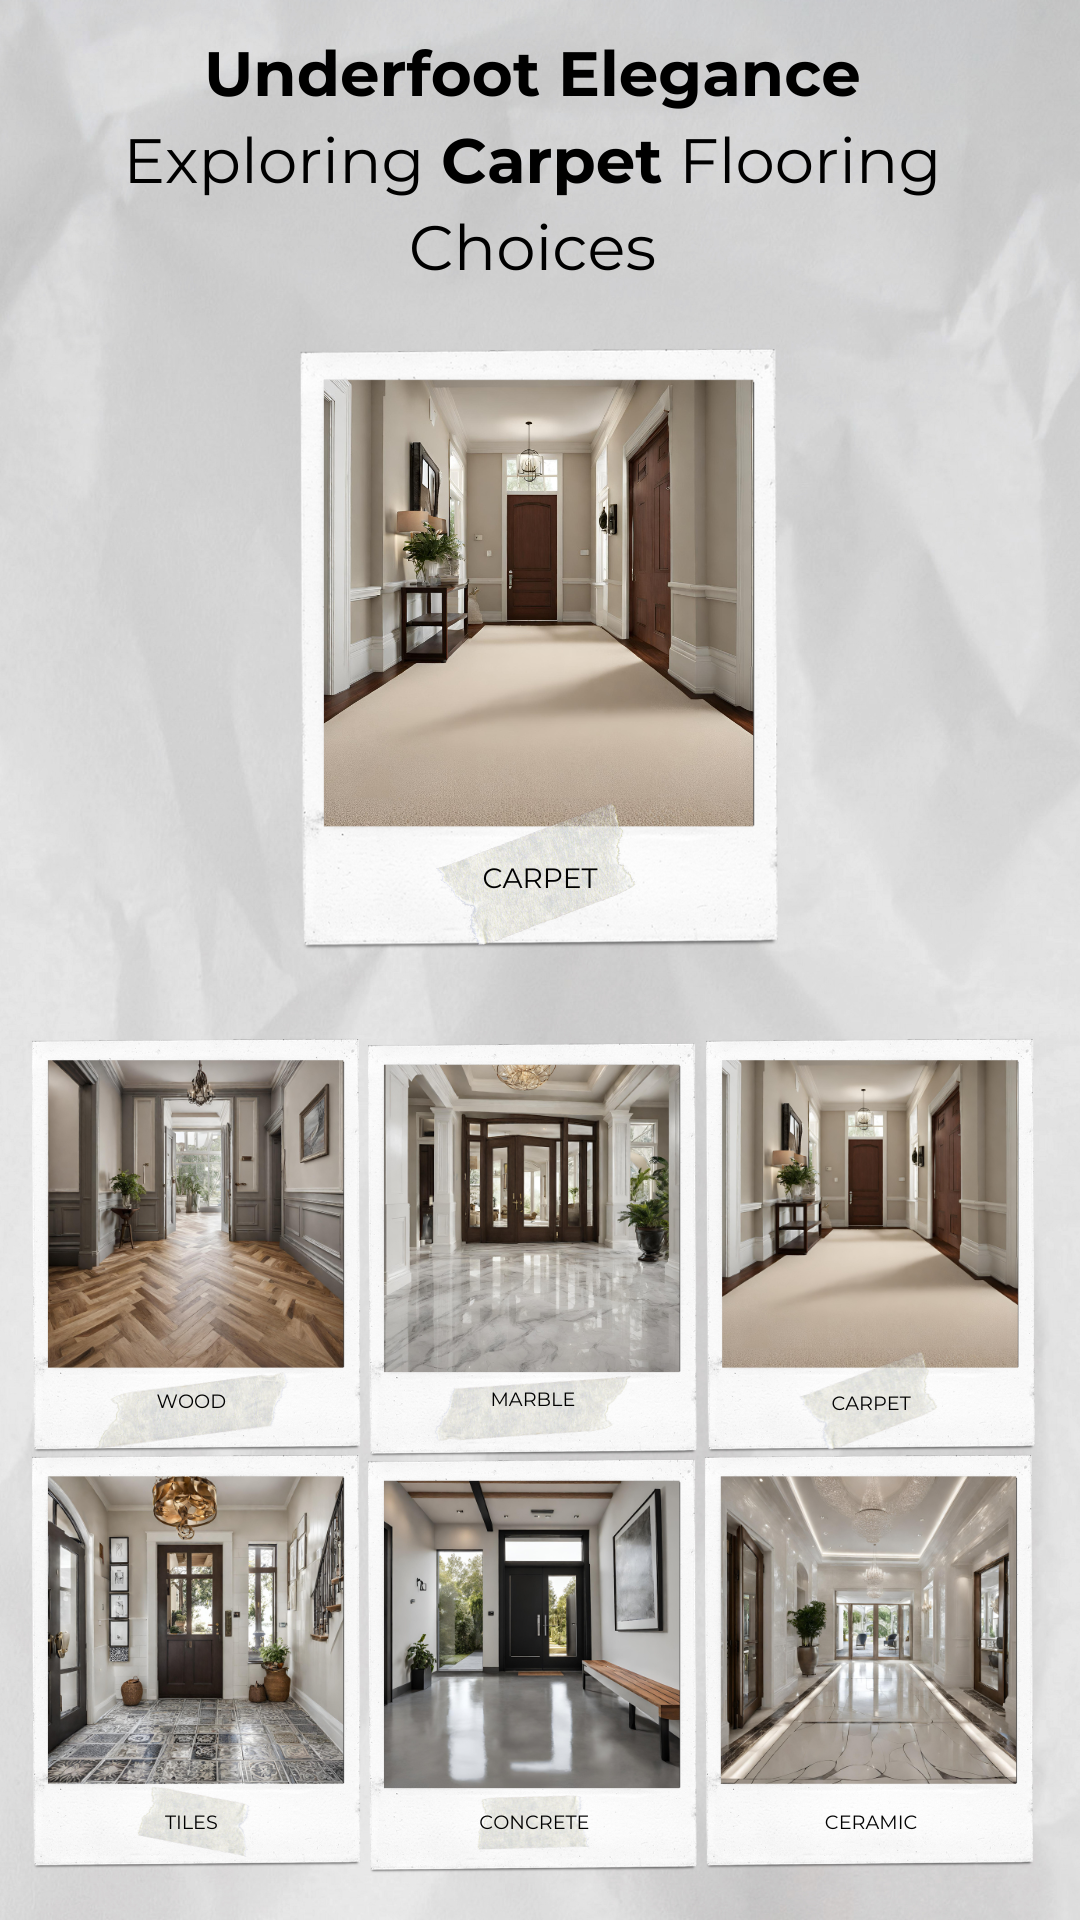 Step Into Serenity: The Luxurious Appeal of a Carpeted Entrance